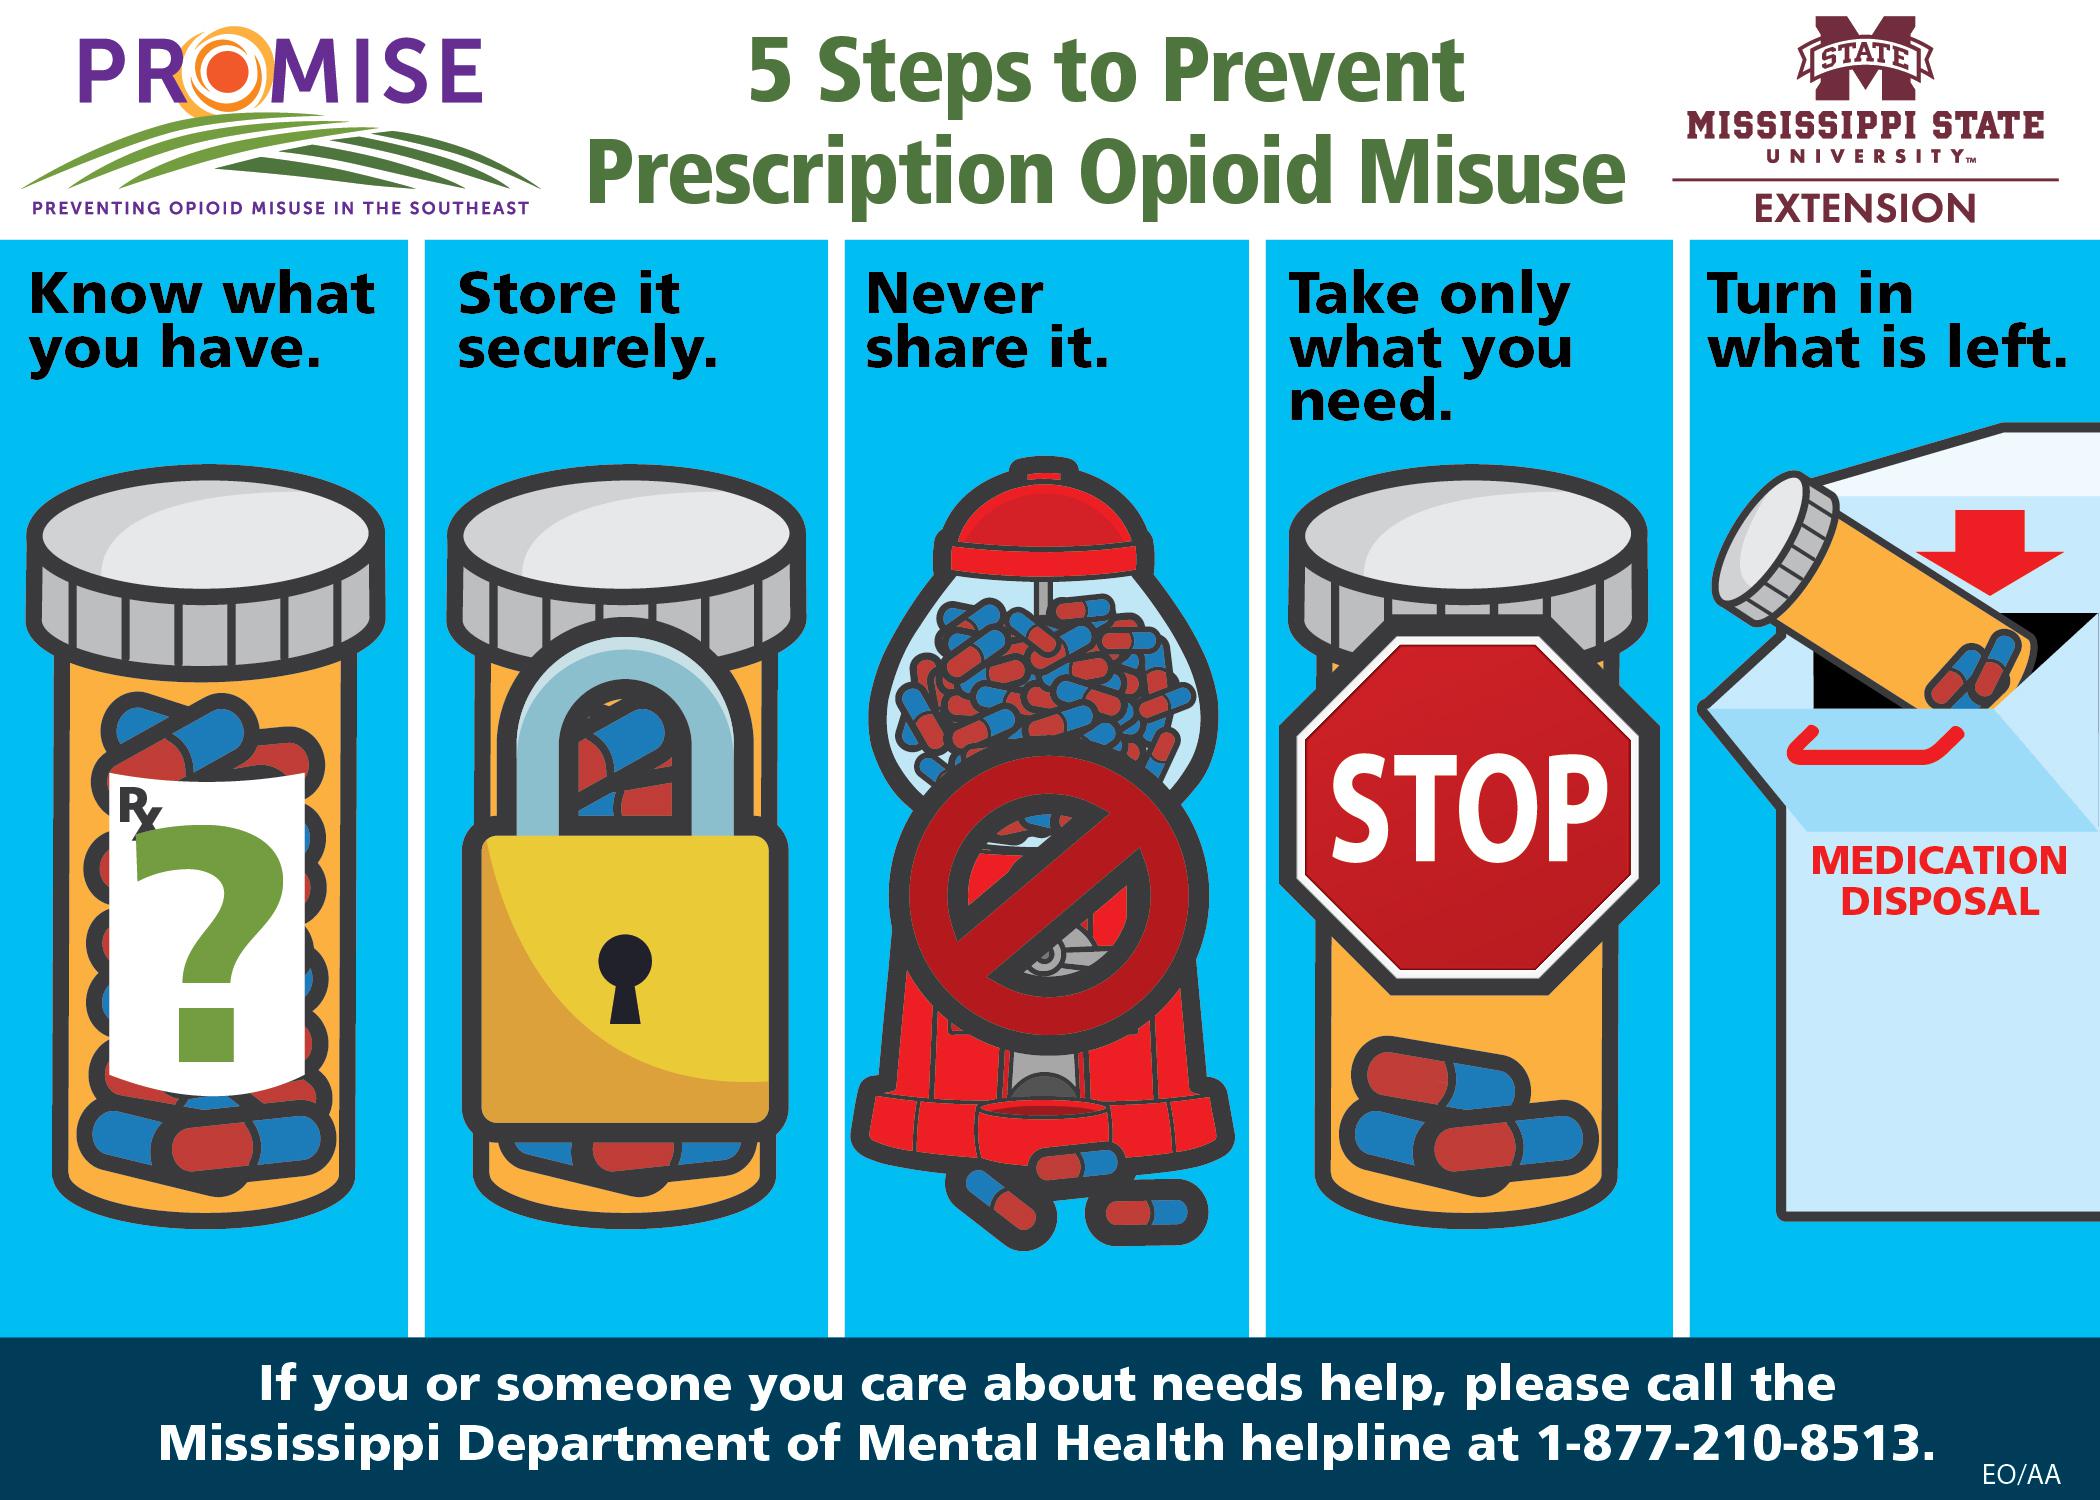 5 Steps to Prevent Prescription Opioid Misuse  Know what you have. Store it securely. Never share it. Take only what you need. Turn in what’s left.  If you or someone you care about needs help, please call the Mississippi Department of Mental Health helpline at 1-877-210-8513.